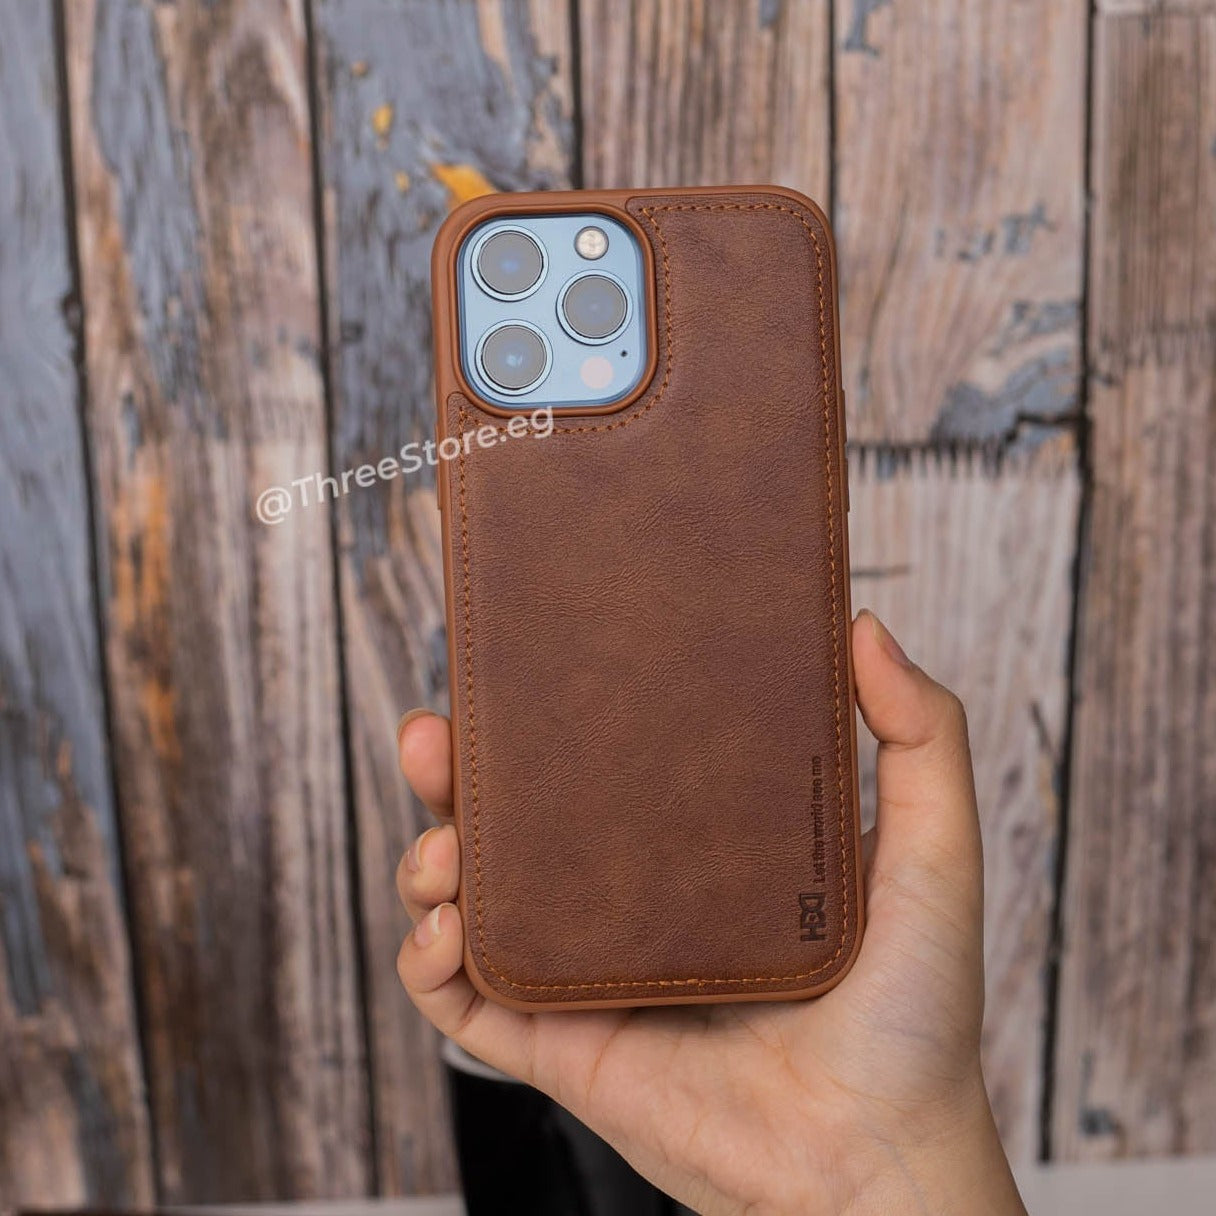 HDD Leather Case iPhone 13 Pro Max Three store